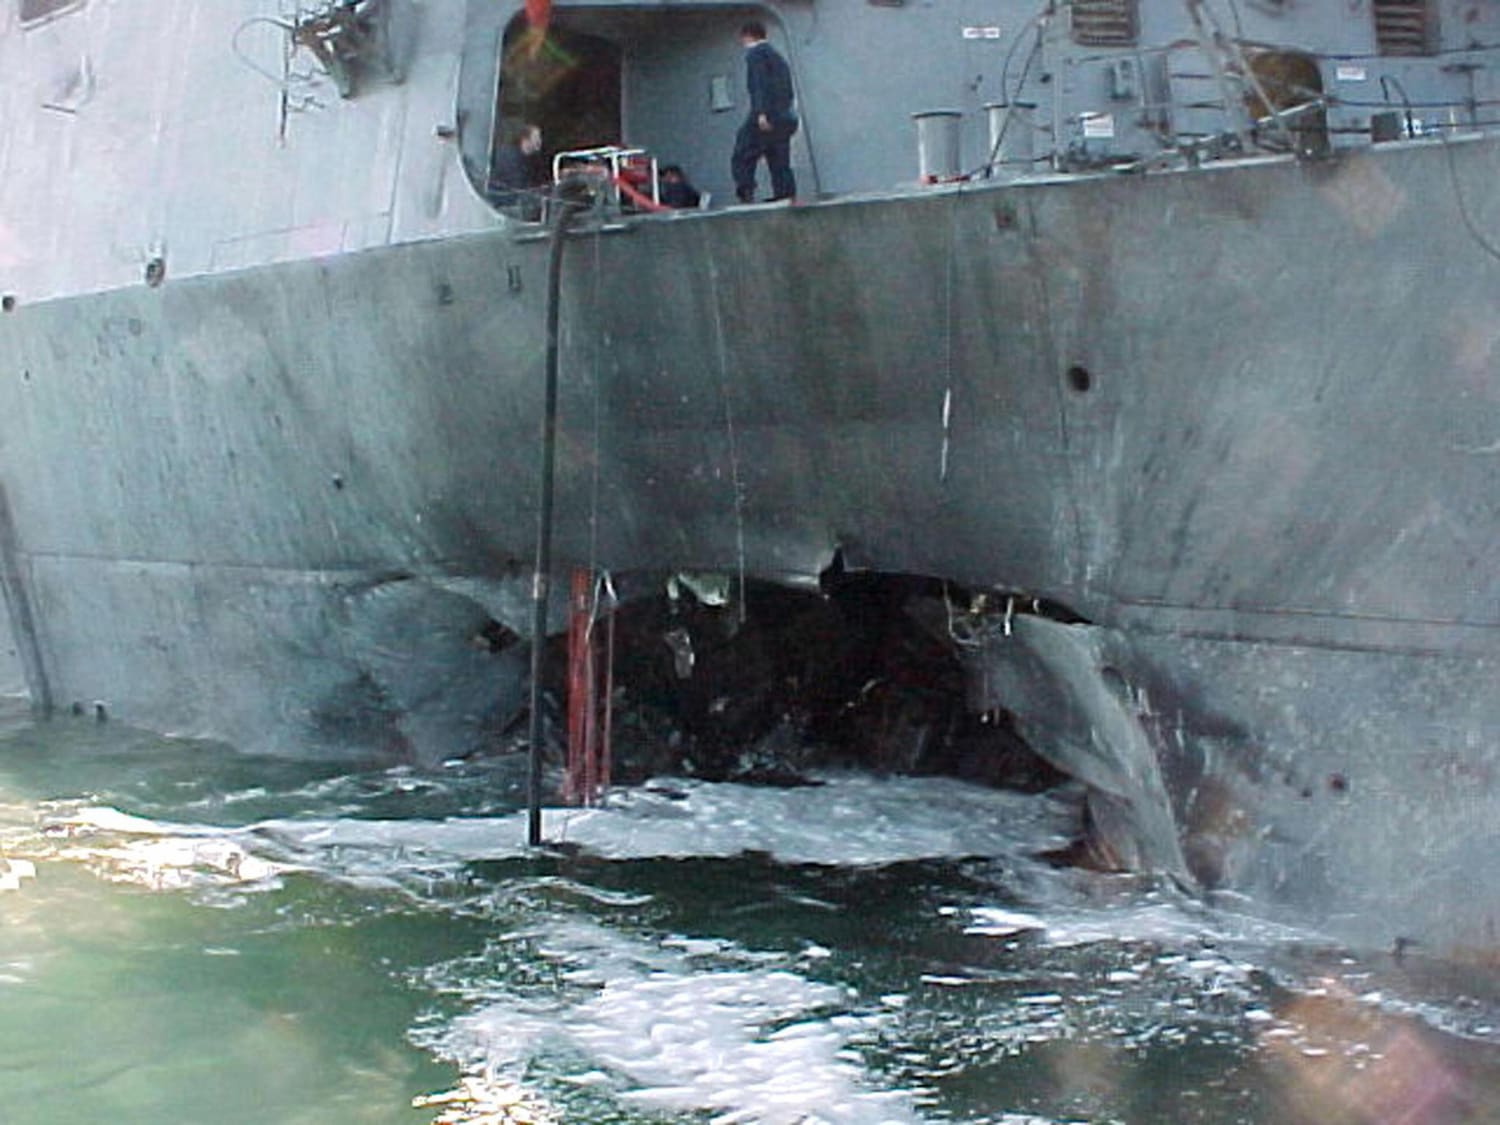 Qaeda militant tied to deadly USS Cole bombing killed in airstrike